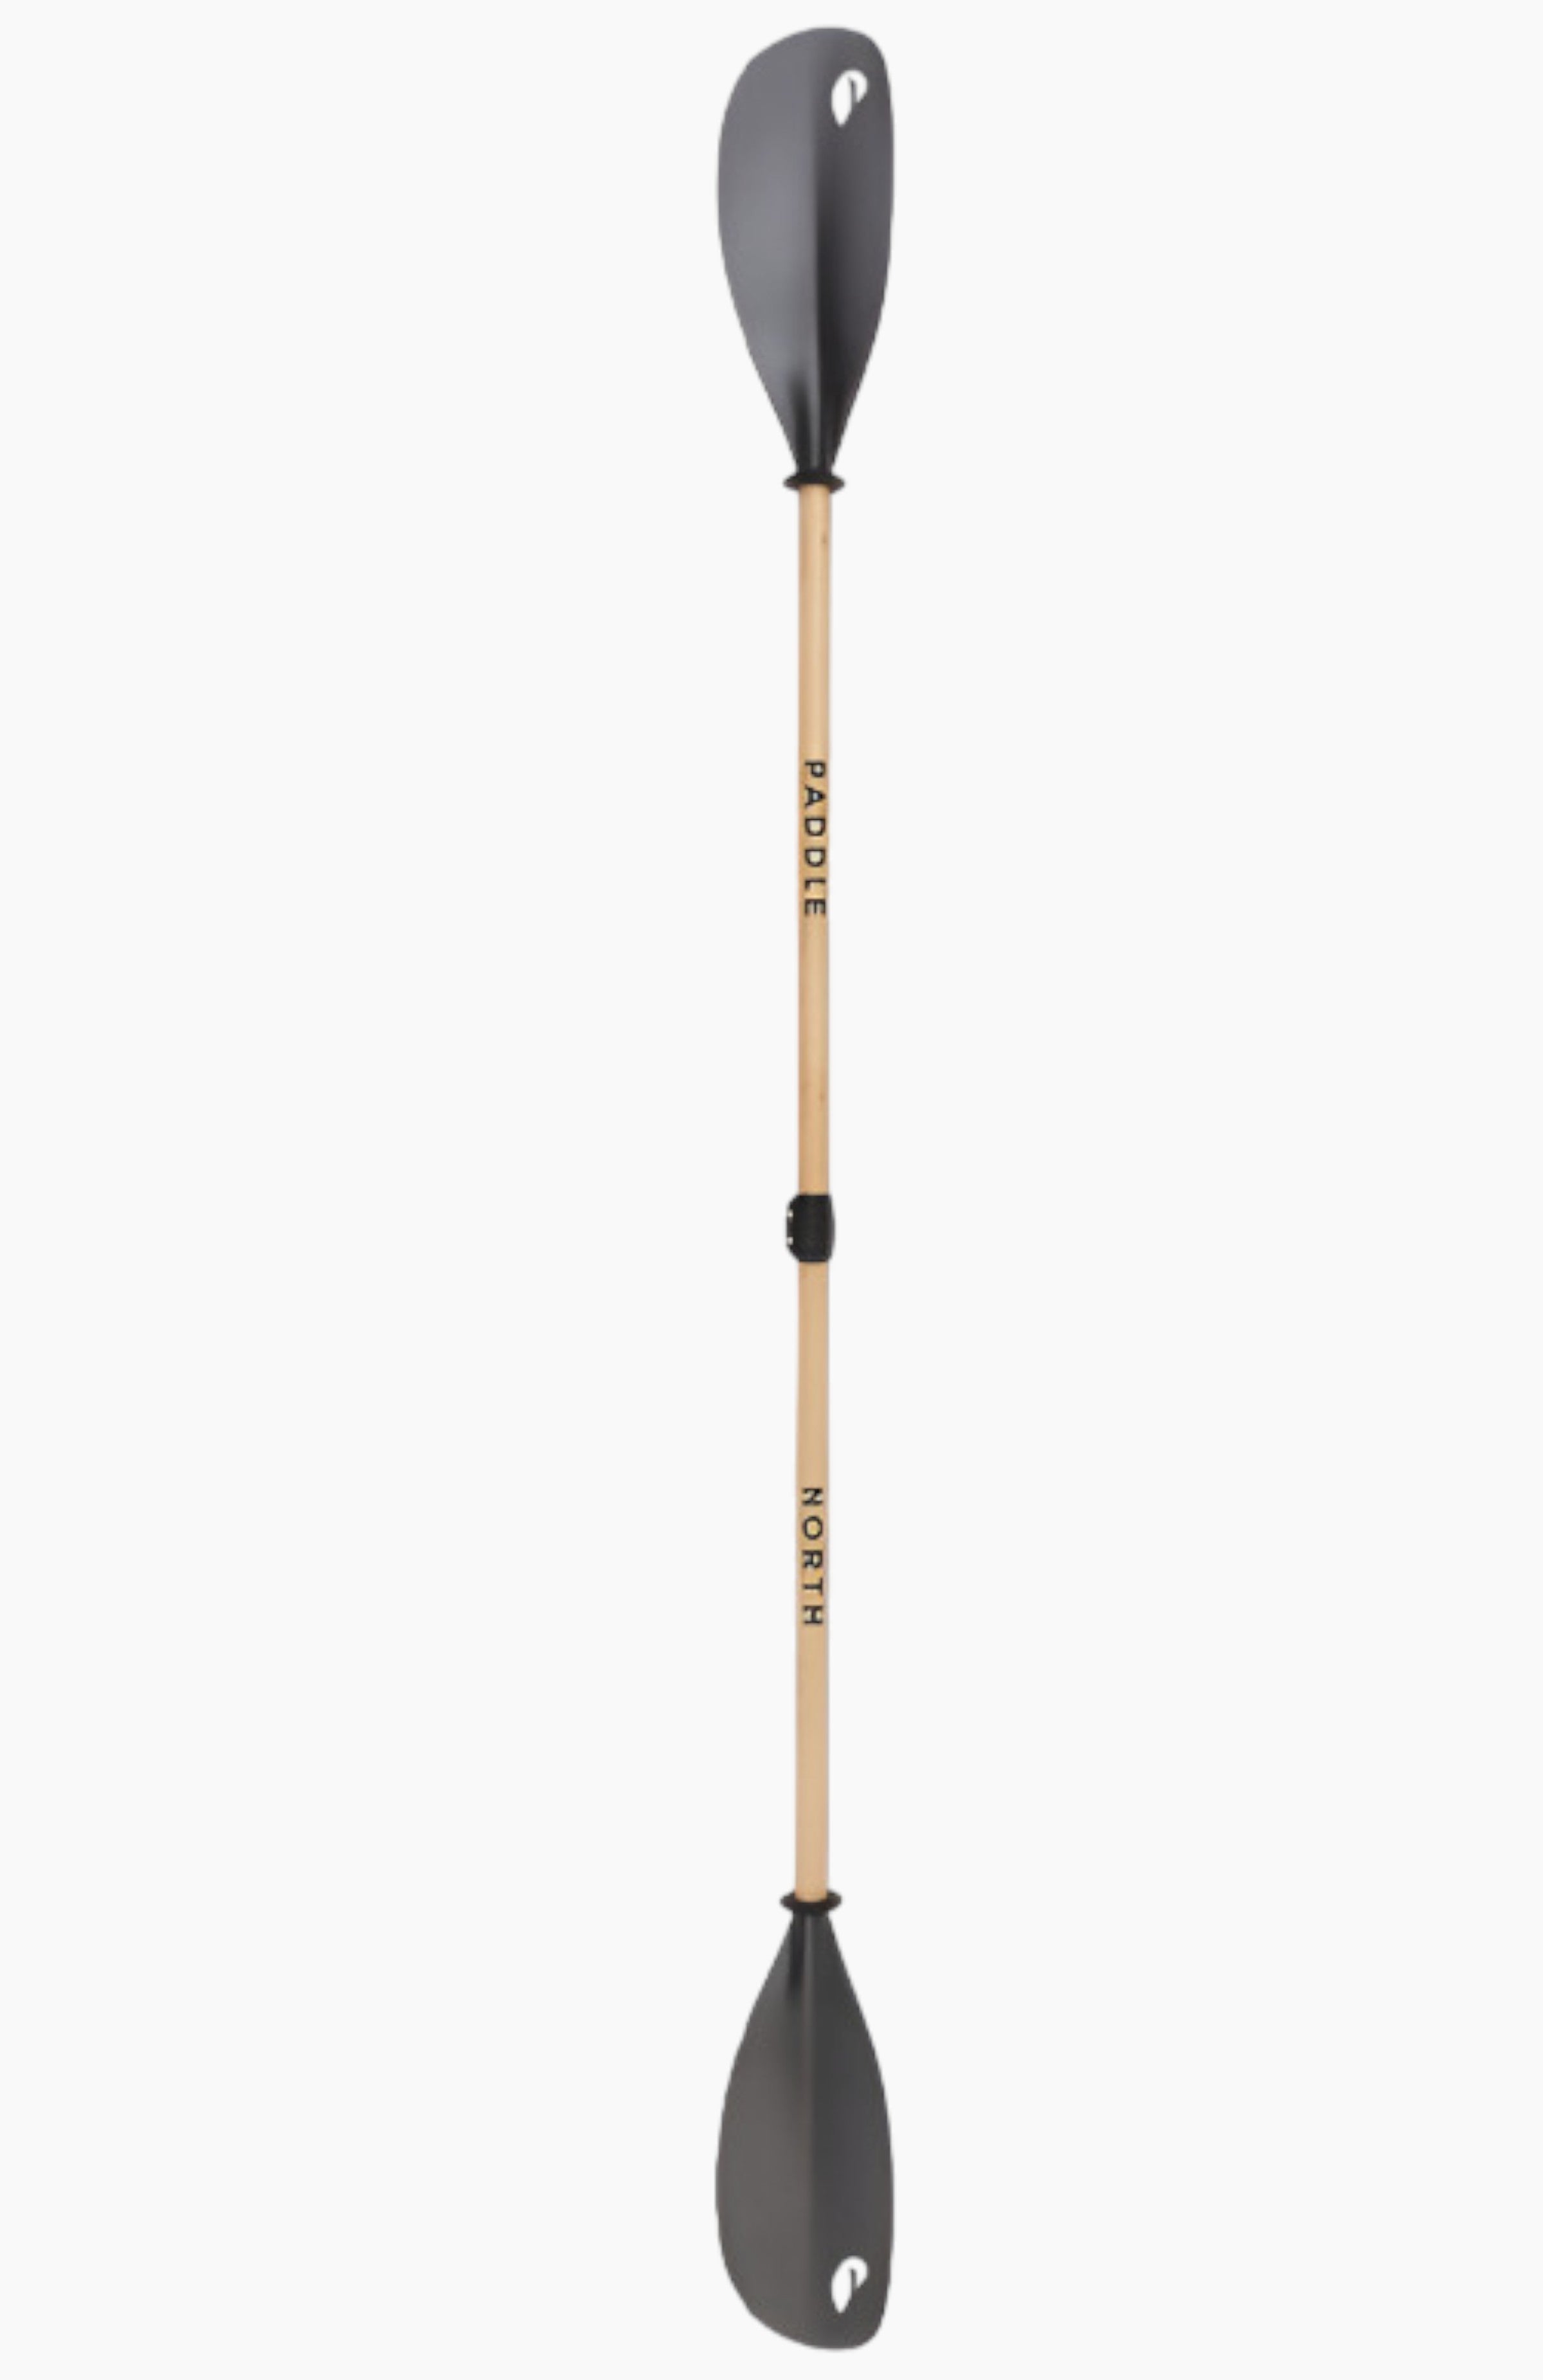 Photo of a kayak paddle with paddles on both ends of the handle. The paddles are black and the handle is wood.